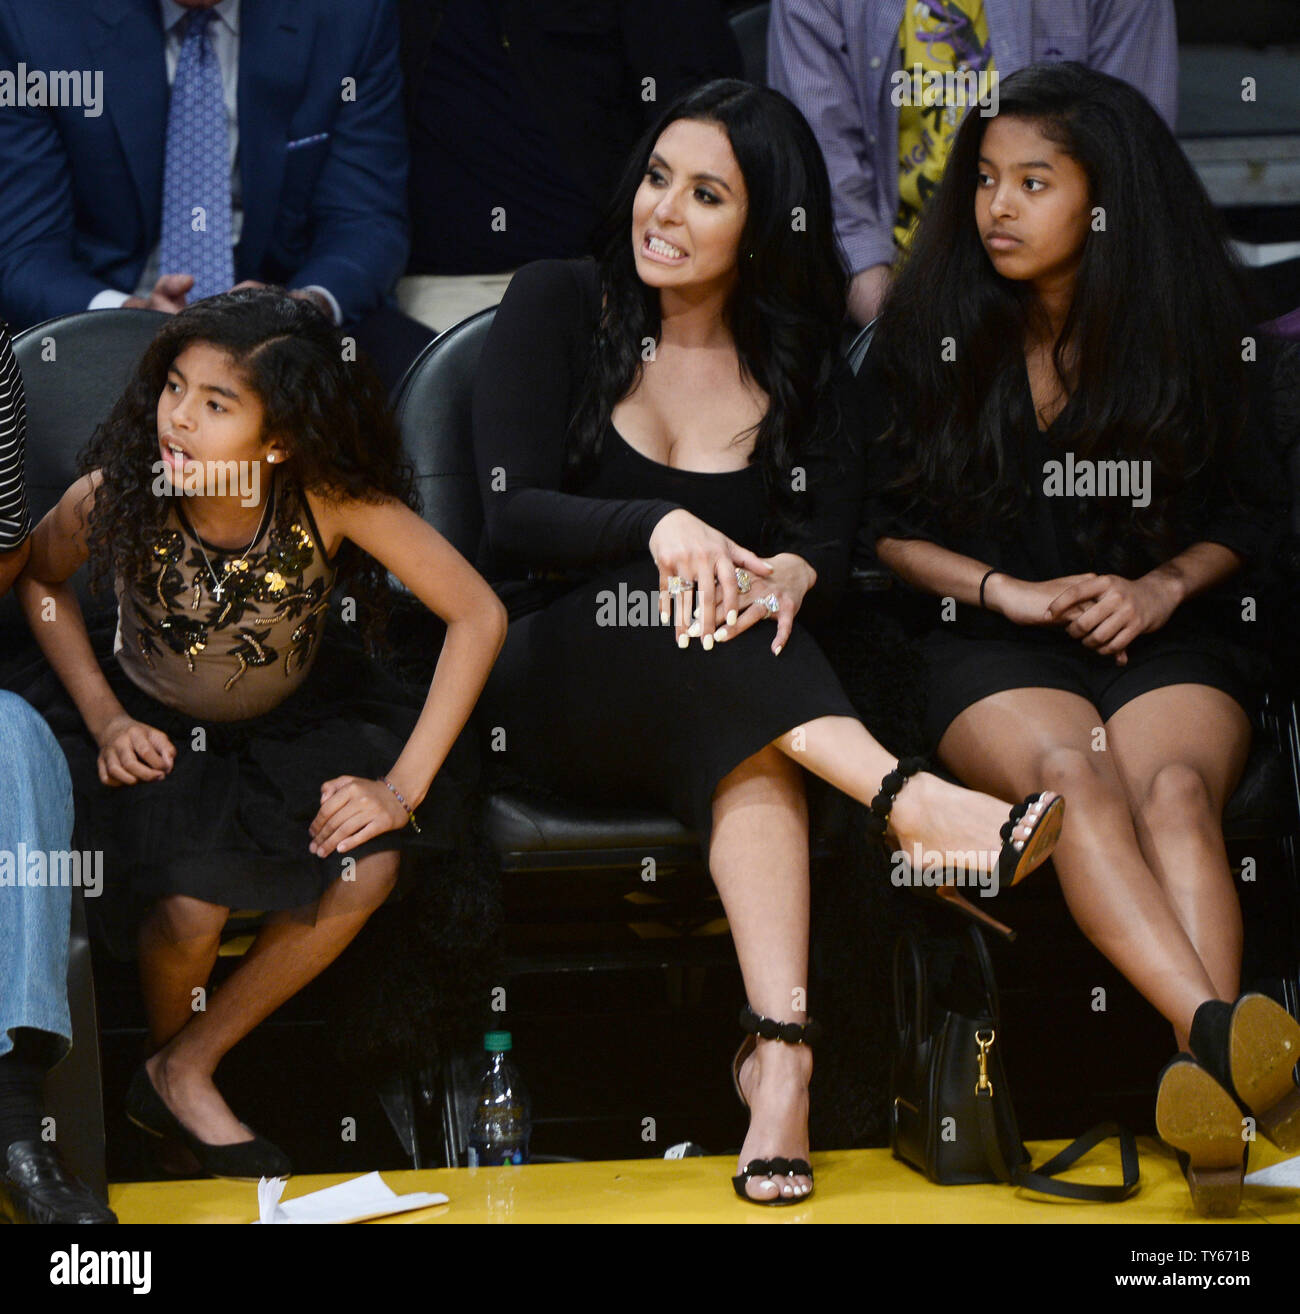 Vanessa Laine Bryant and her daughters Gianna Maria-Onore Bryant (L) and  Natalia Diamante Bryantsit courtside as they attend Kobe Bryant's final  game as a Los Angeles Laker at Staples Center in Los